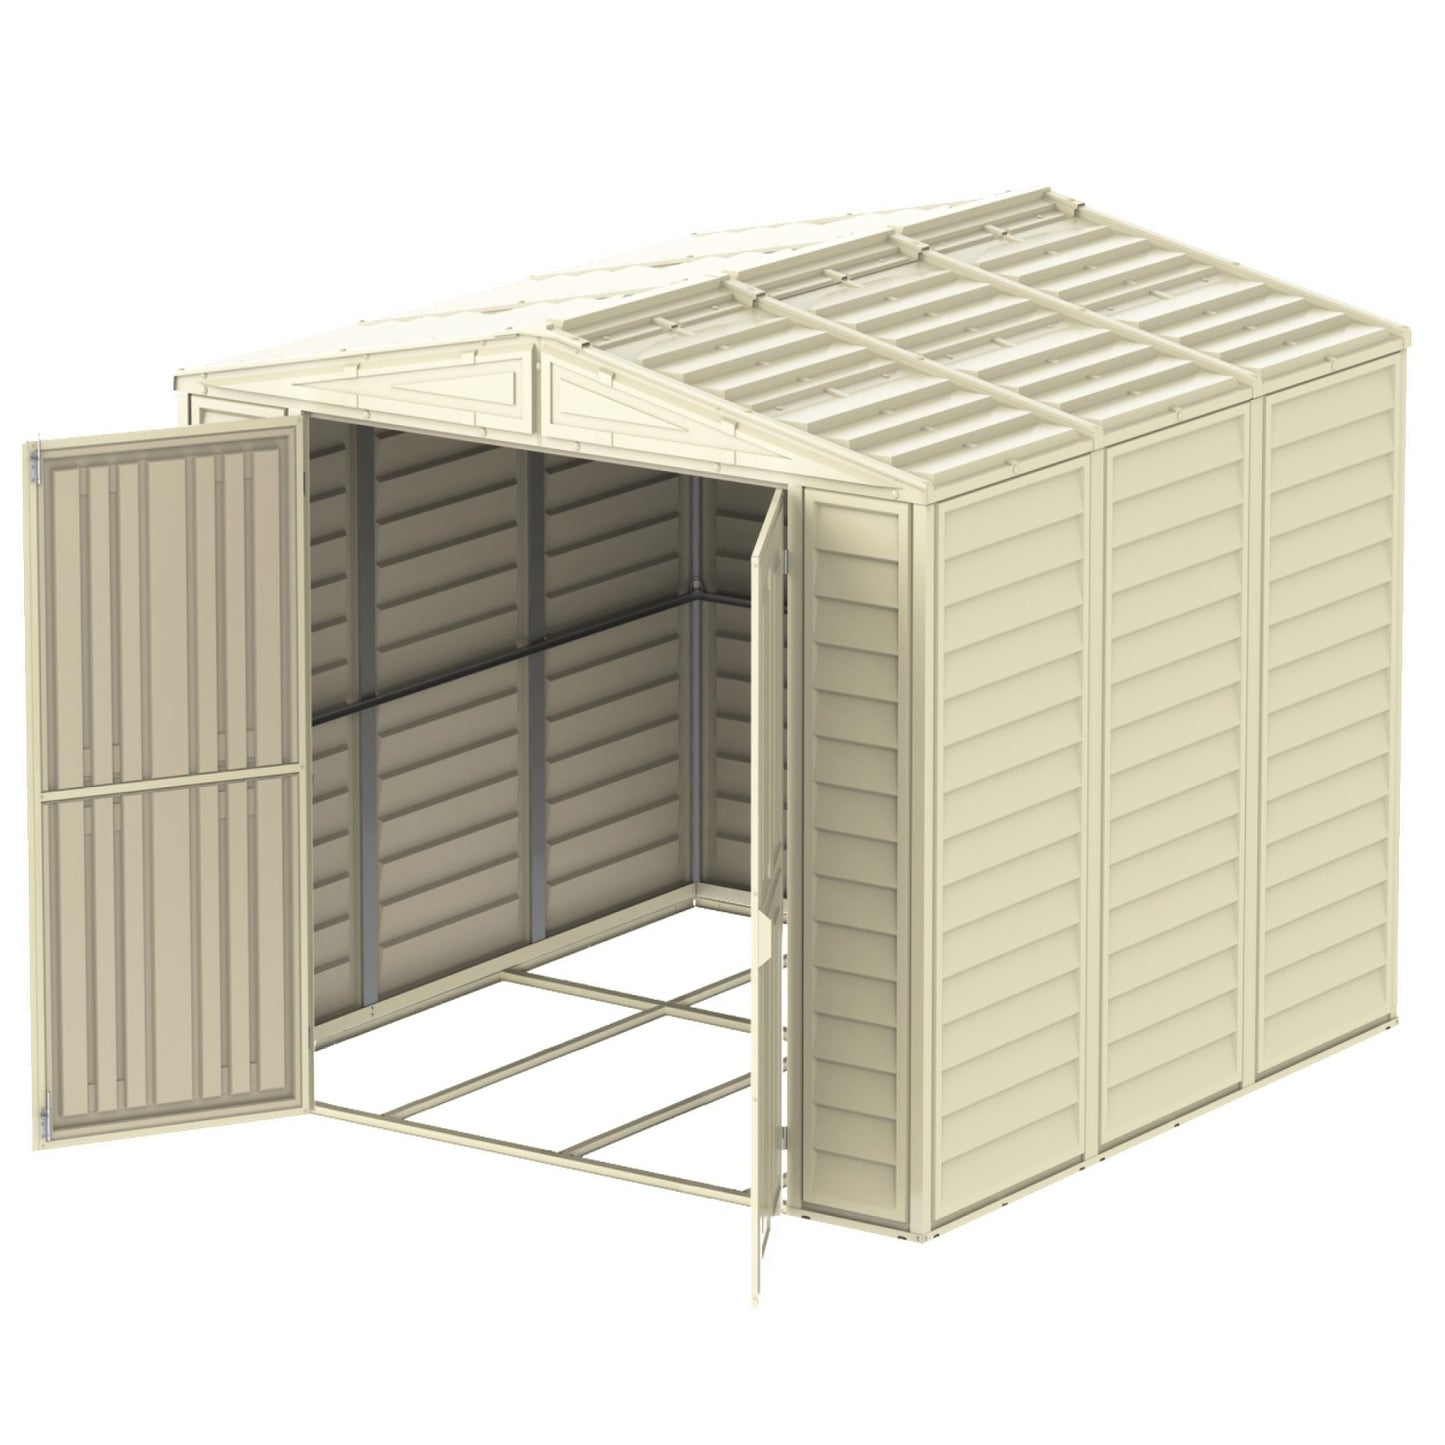 DuraMax | 8x8x6 Ft DuraMate Vinyl Plastic Storage Shed with Foundation